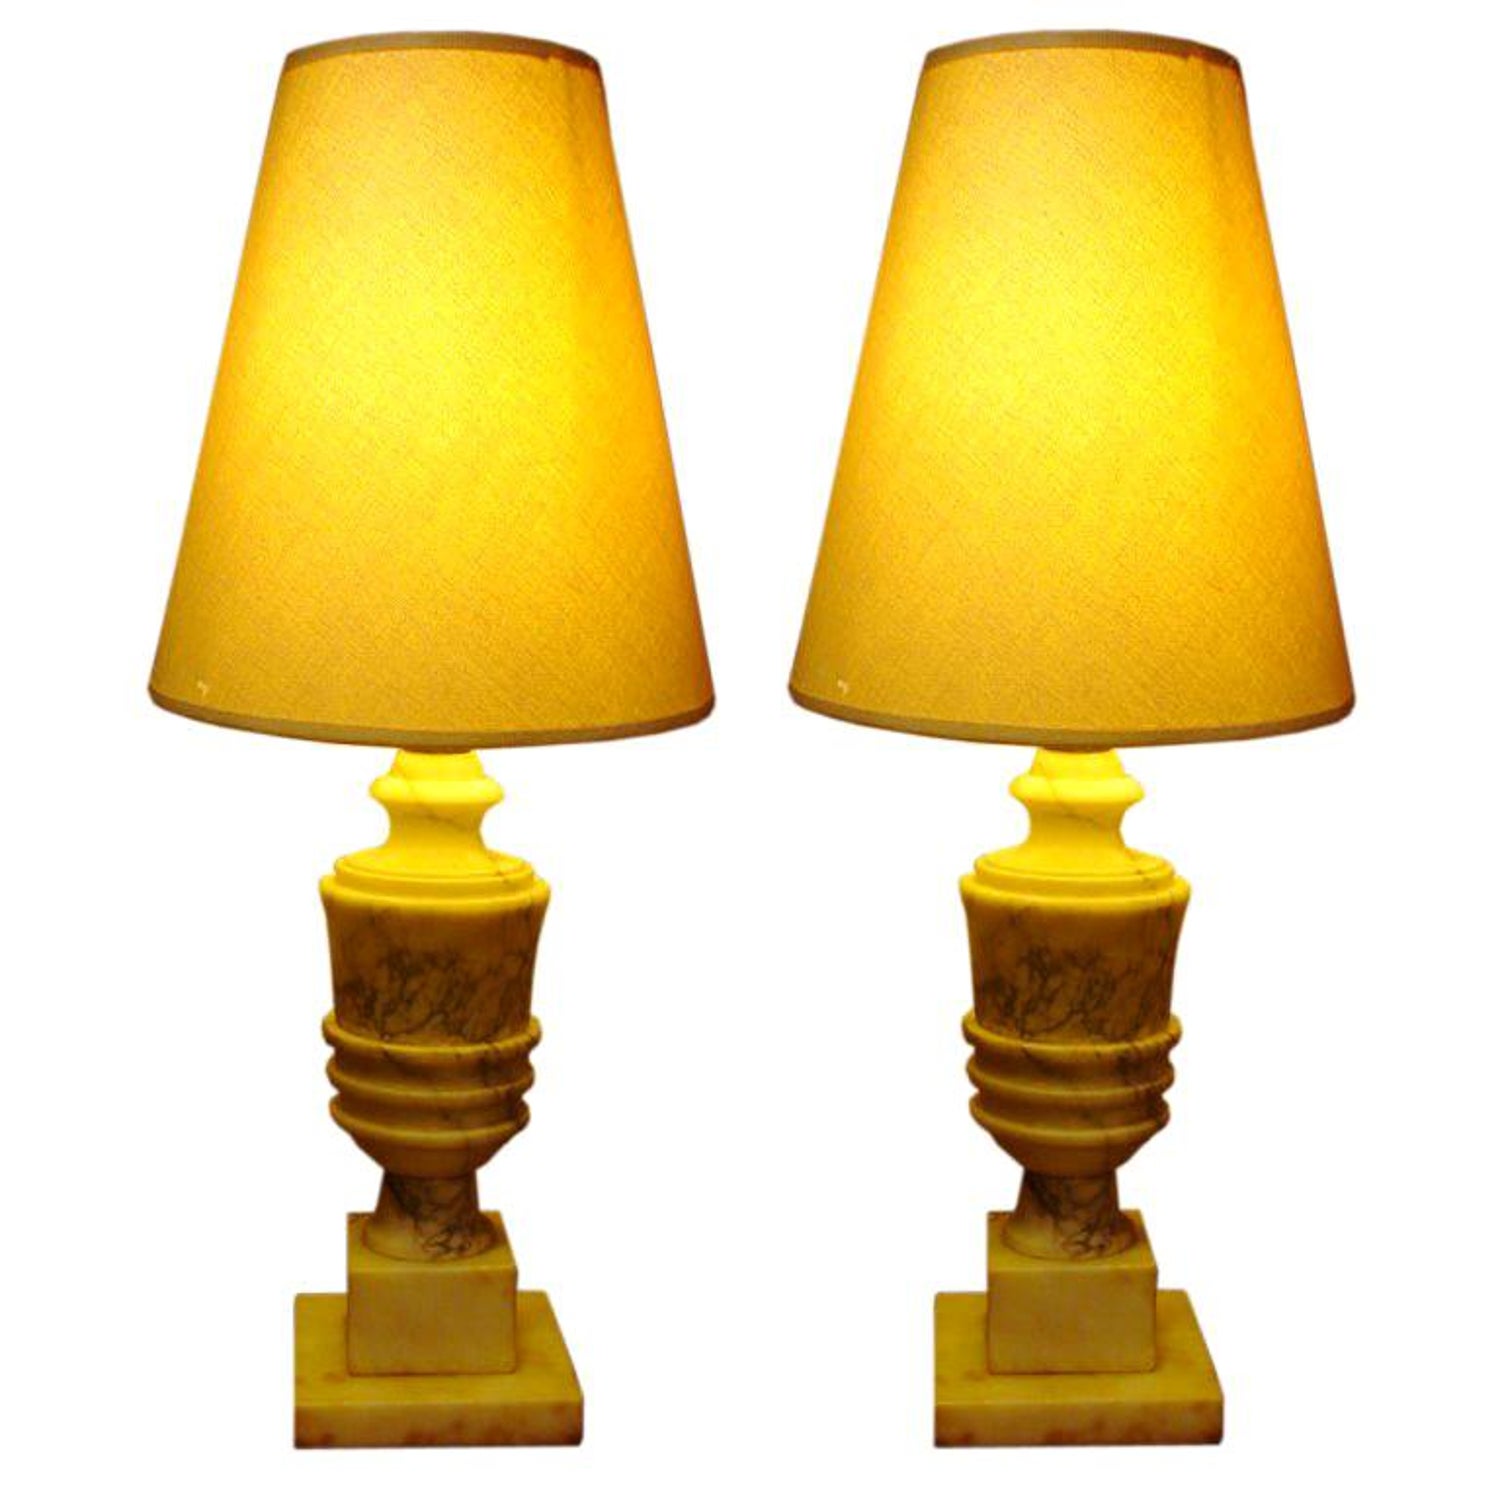 Pair of Vintage 1940s French Alabaster Boudoir Lamps For Sale at 1stDibs